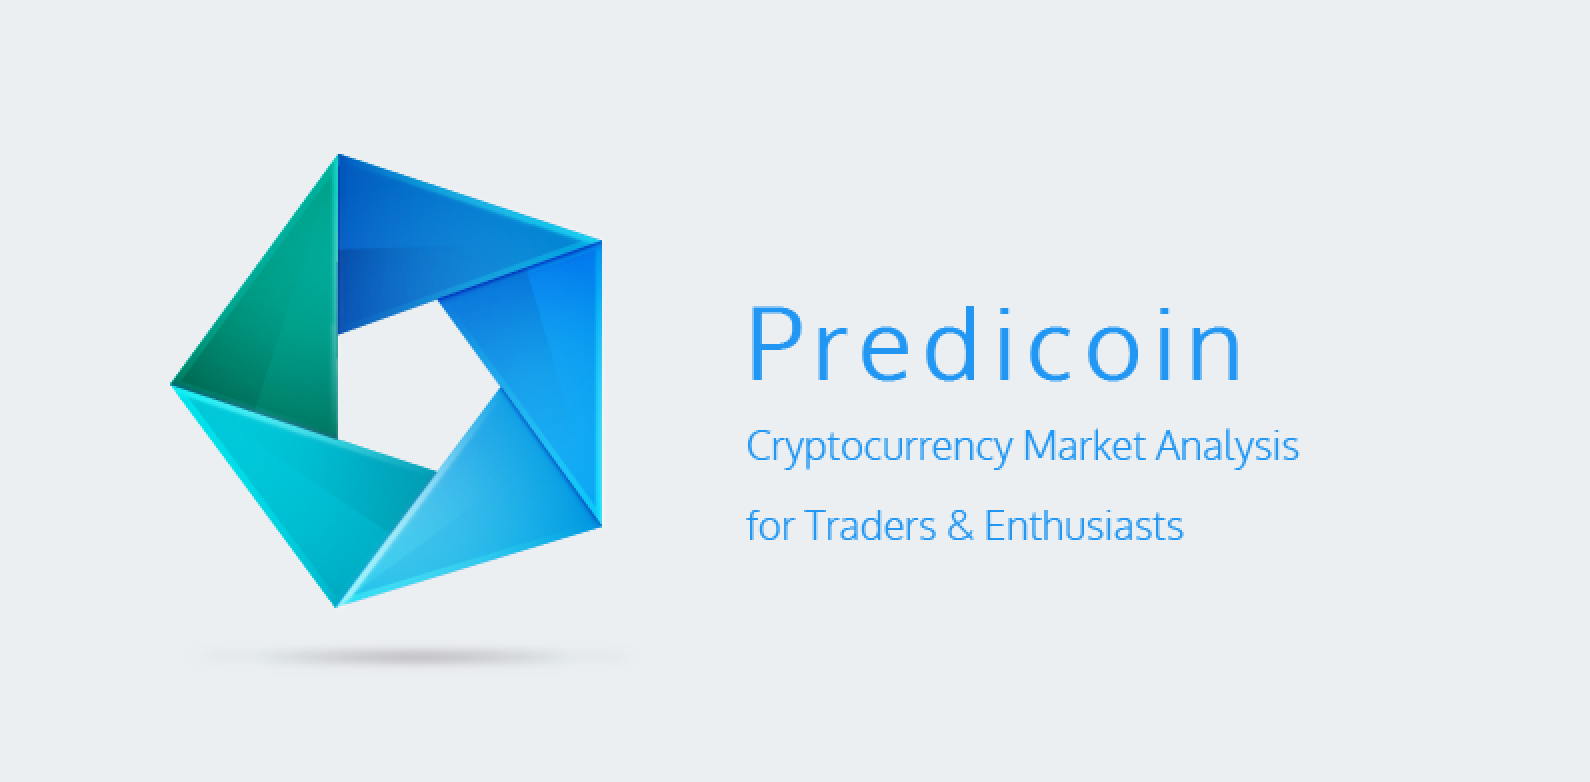 What Makes Predicoin a Unique Cryptocurrency Analytics ...